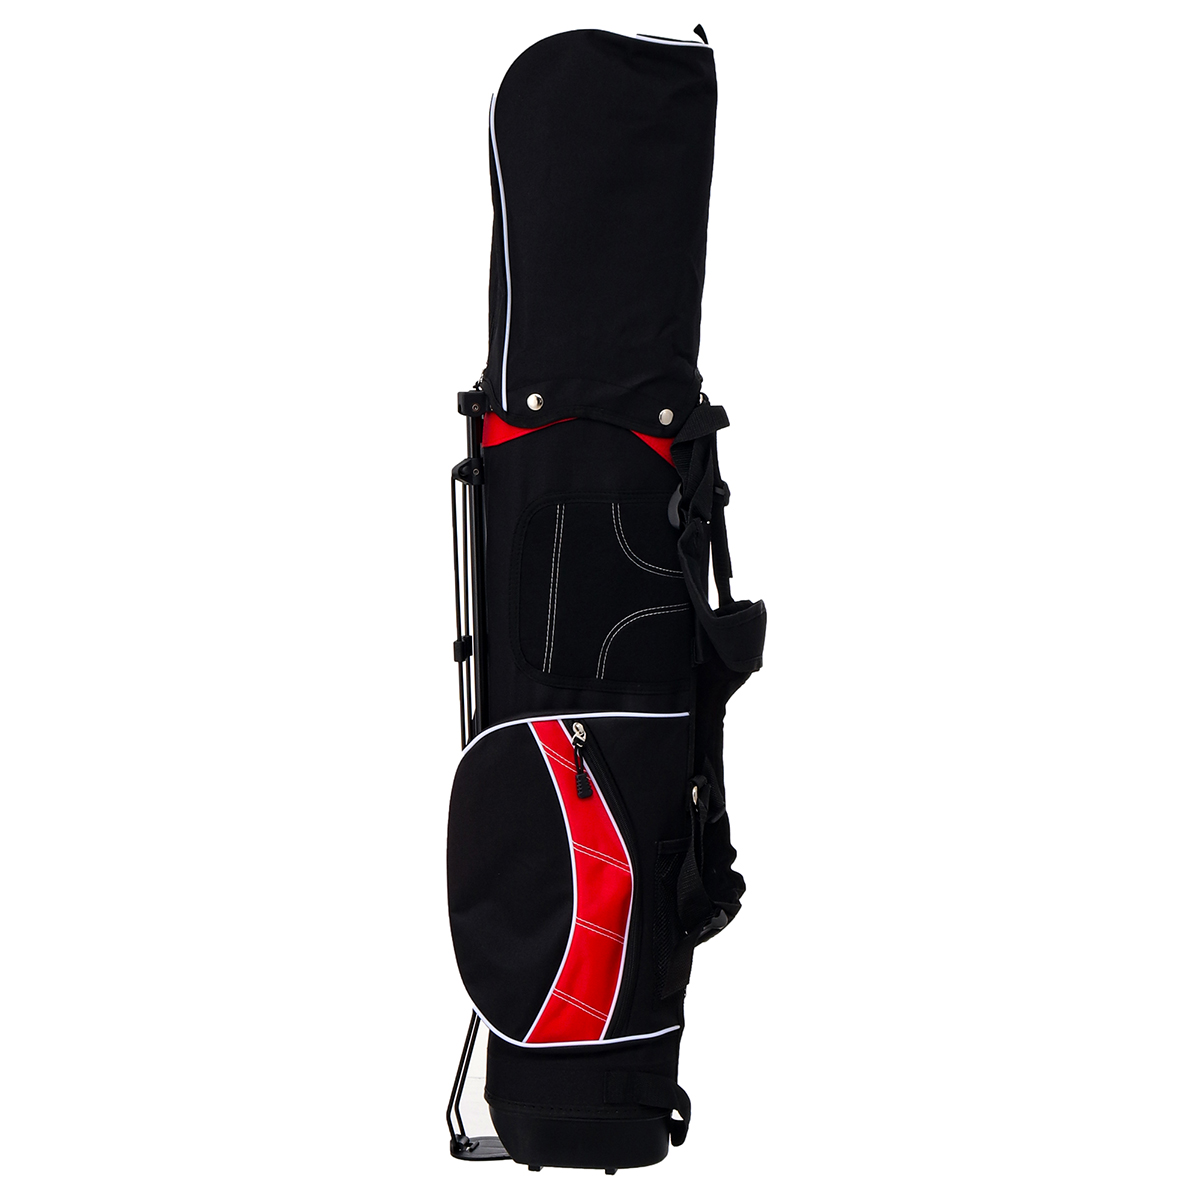 Childrens-Golf-Bag-Golf-Support-Ultra-Light-Stand-Portable-Large-Capacity-Double-Shoulder-Strap-For--1810143-5